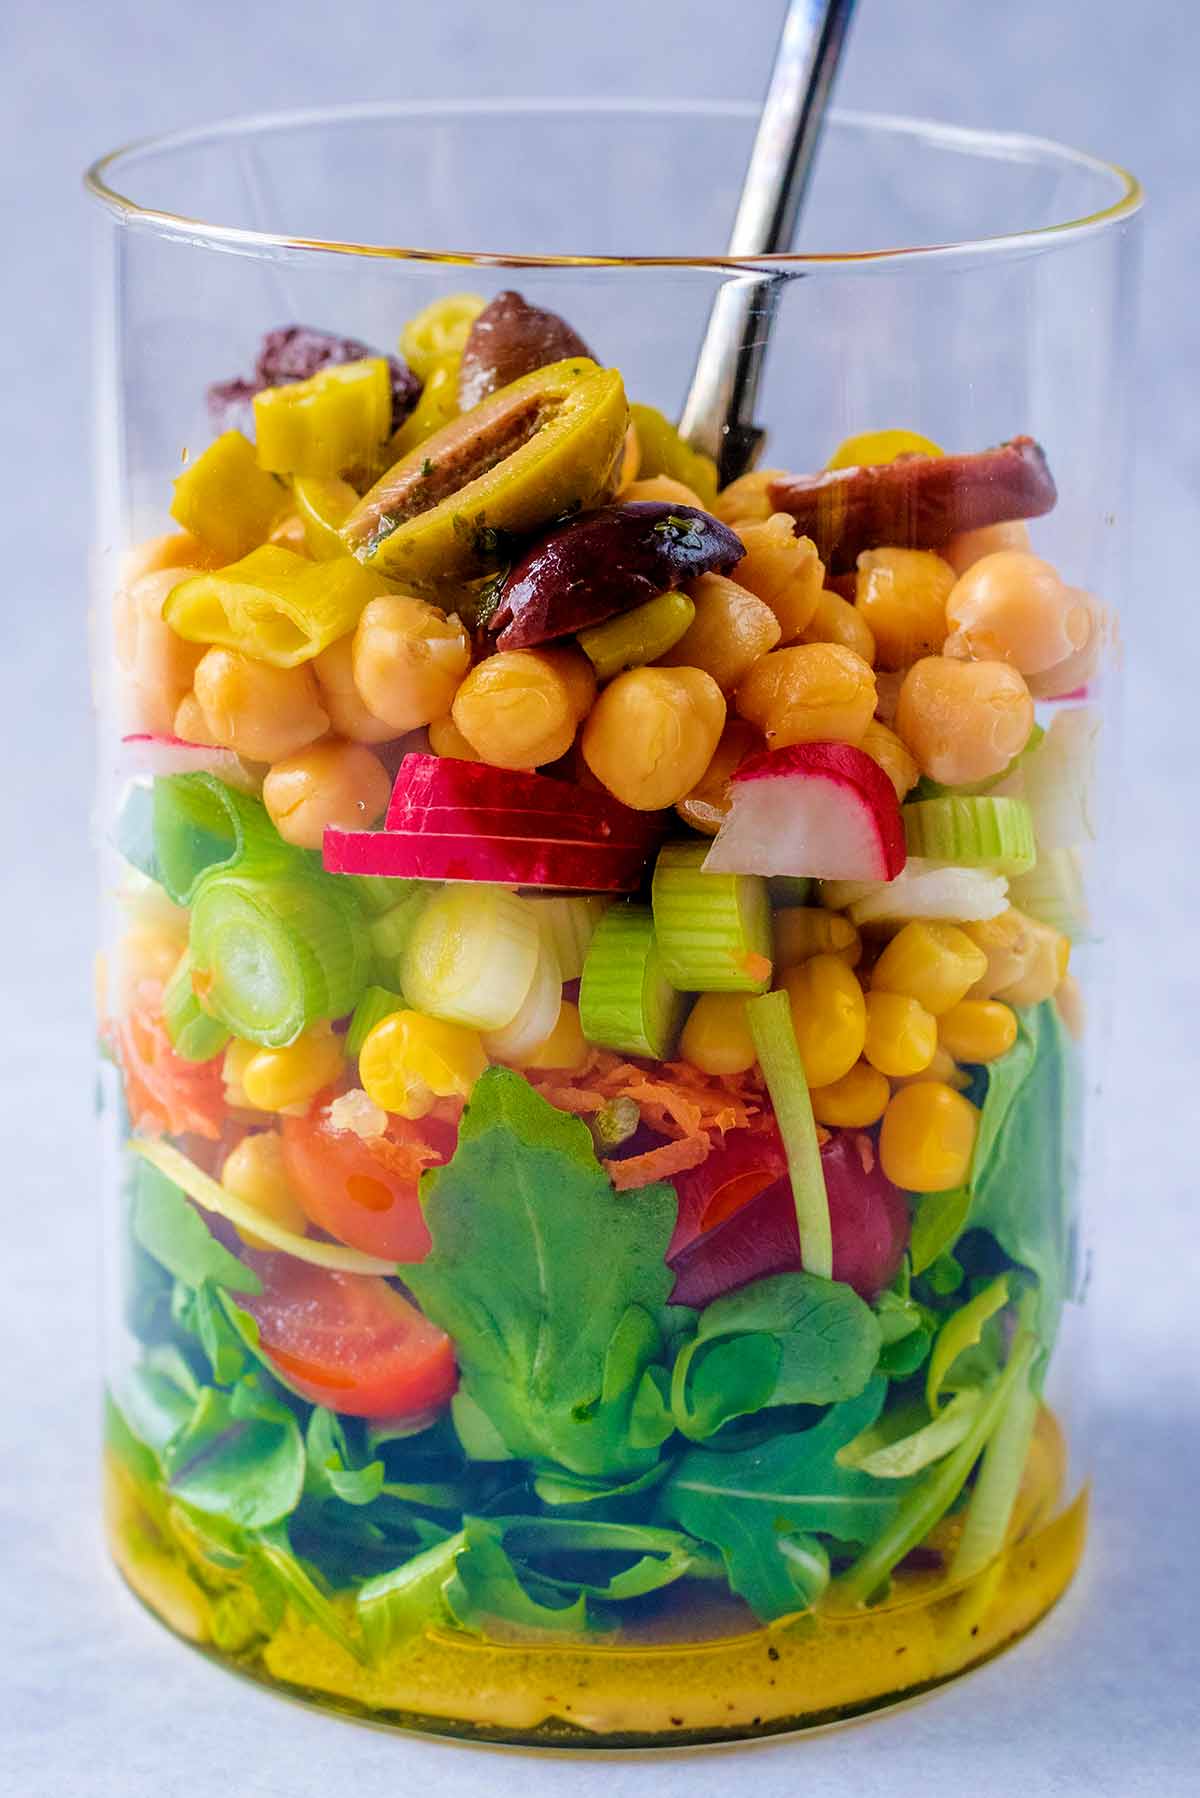 Layers of salad items in a jar with a fork.